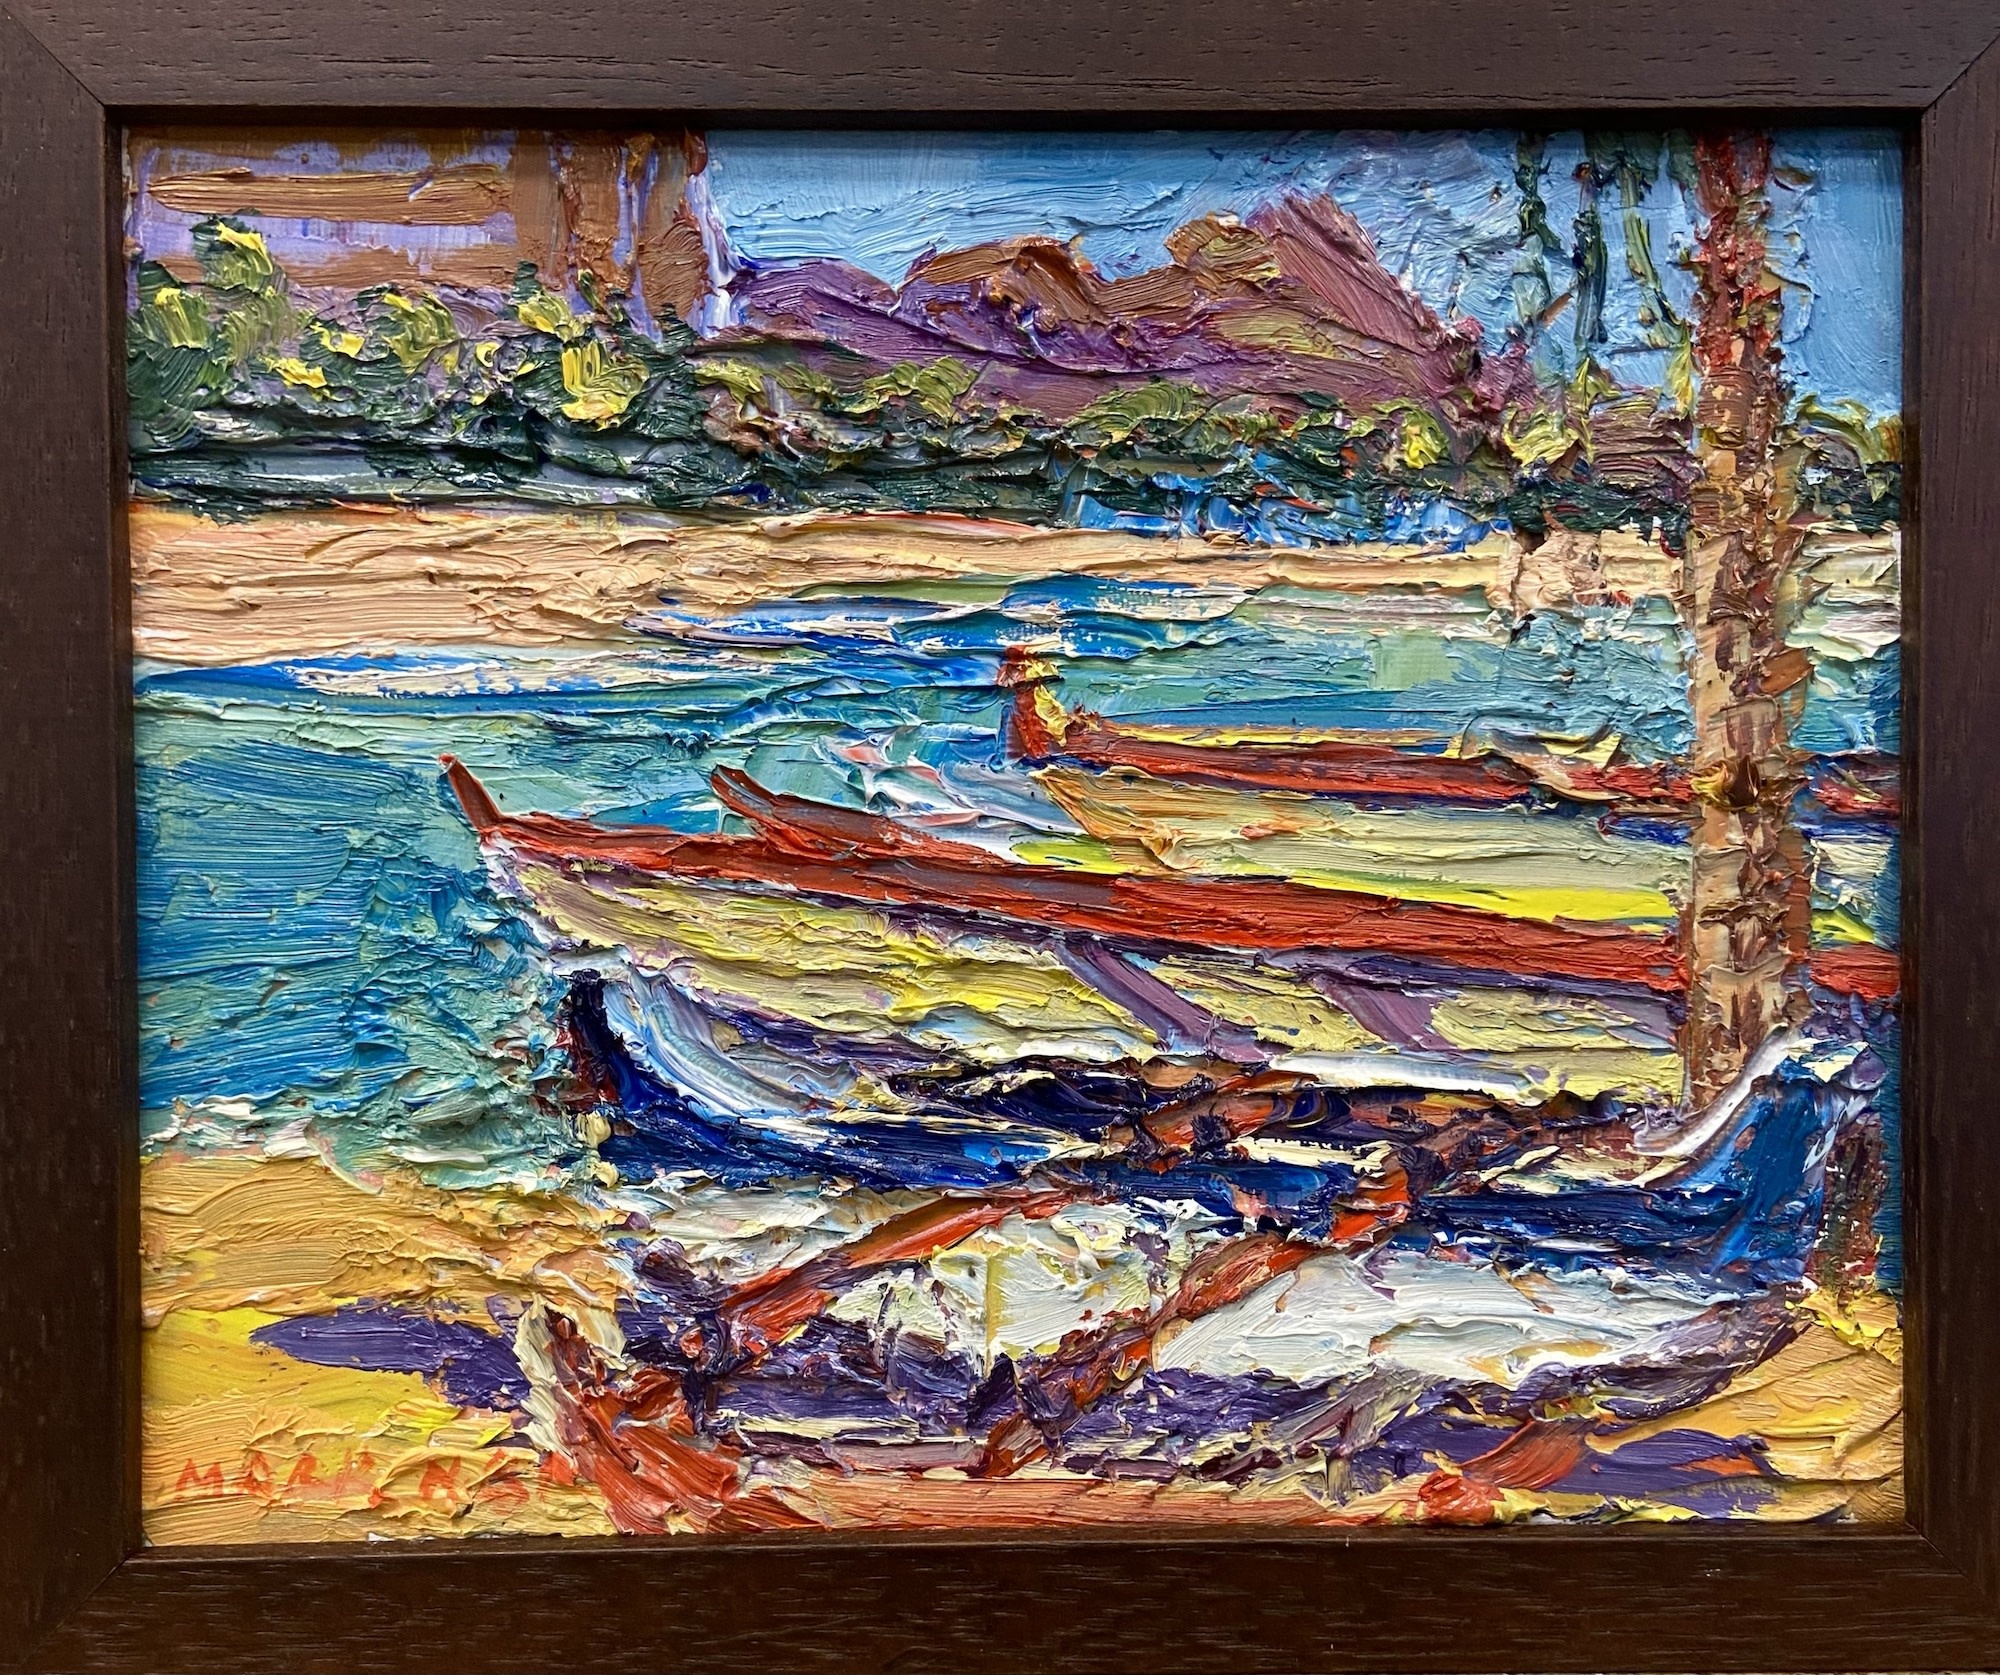 Mark Brown ORIGINAL OIL PAINTING, FRAMED: 8”X10” “THREE CANOES”